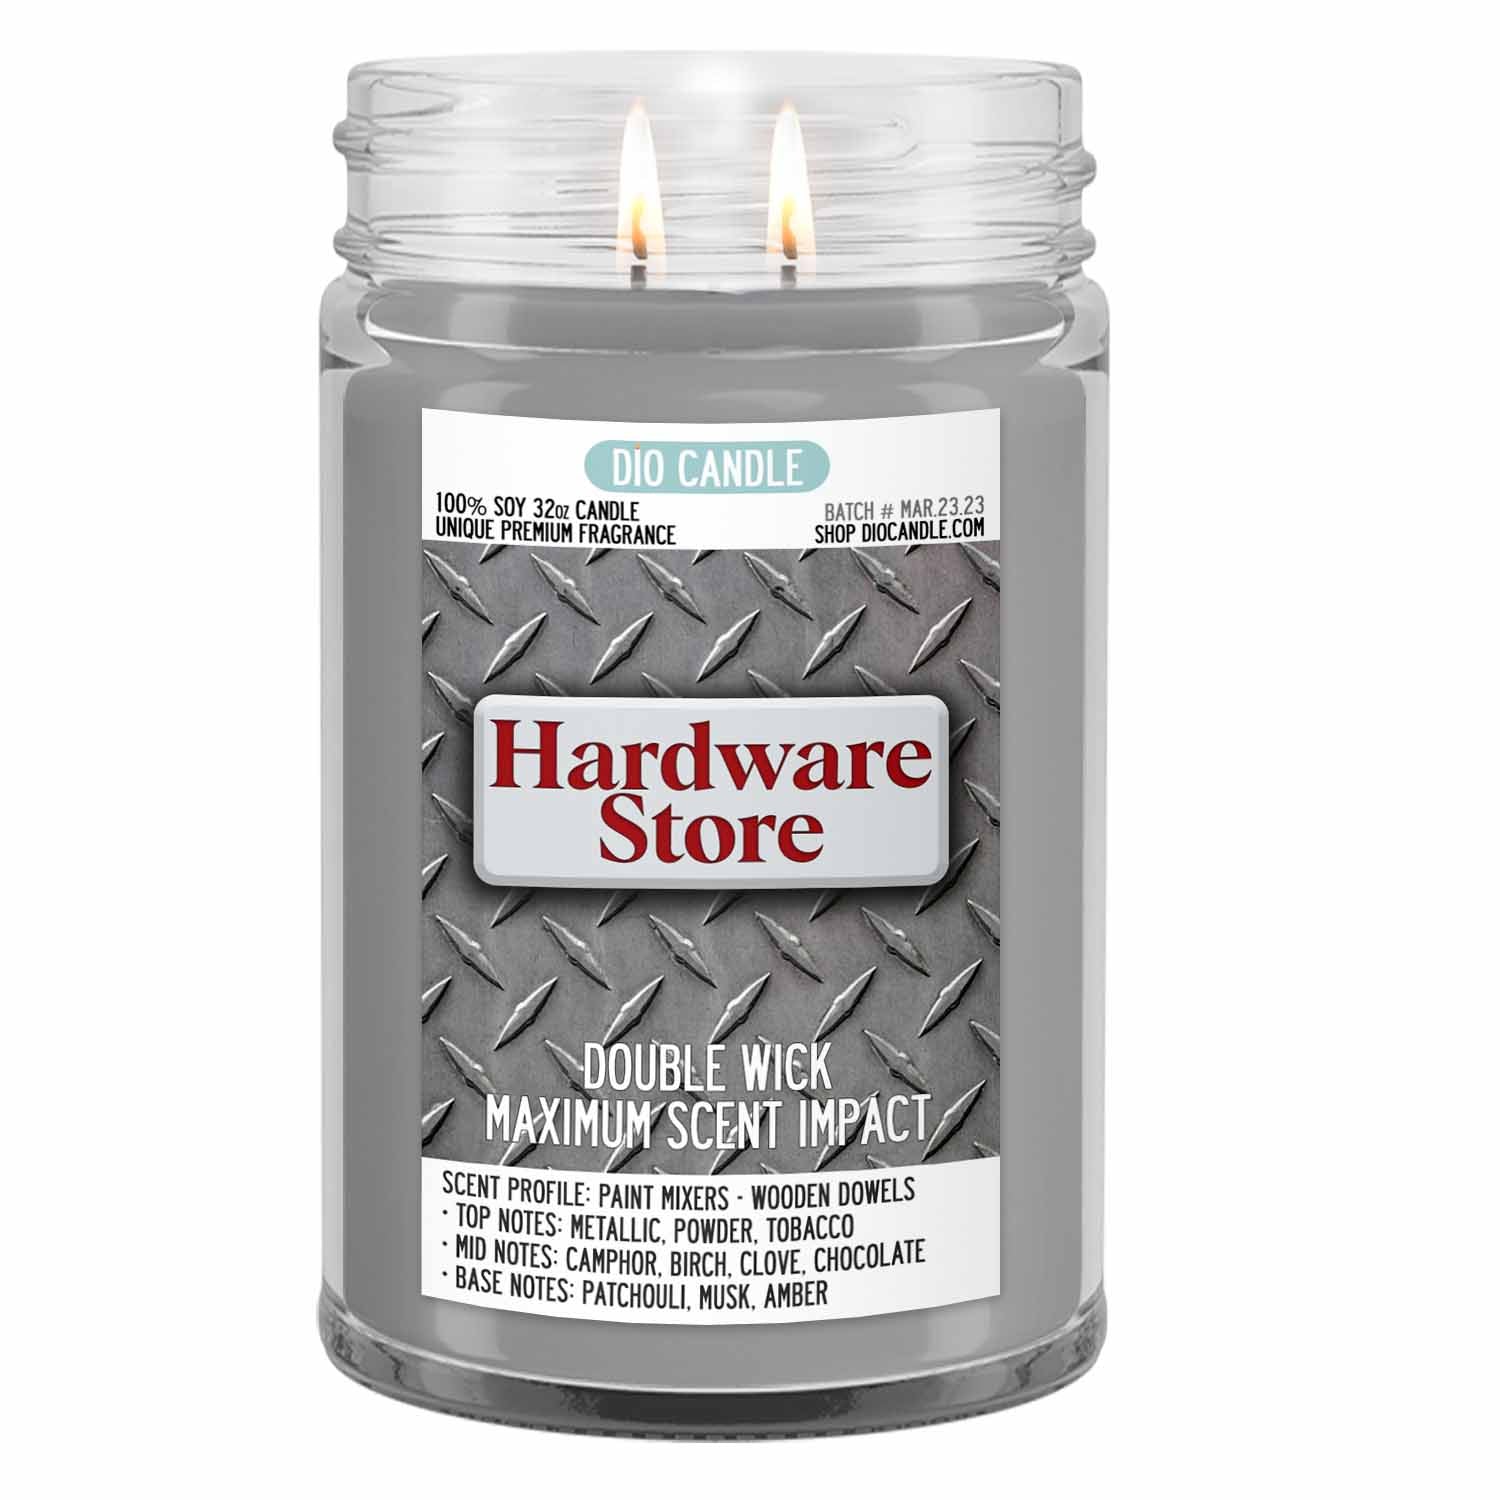 Hardware Store Candle